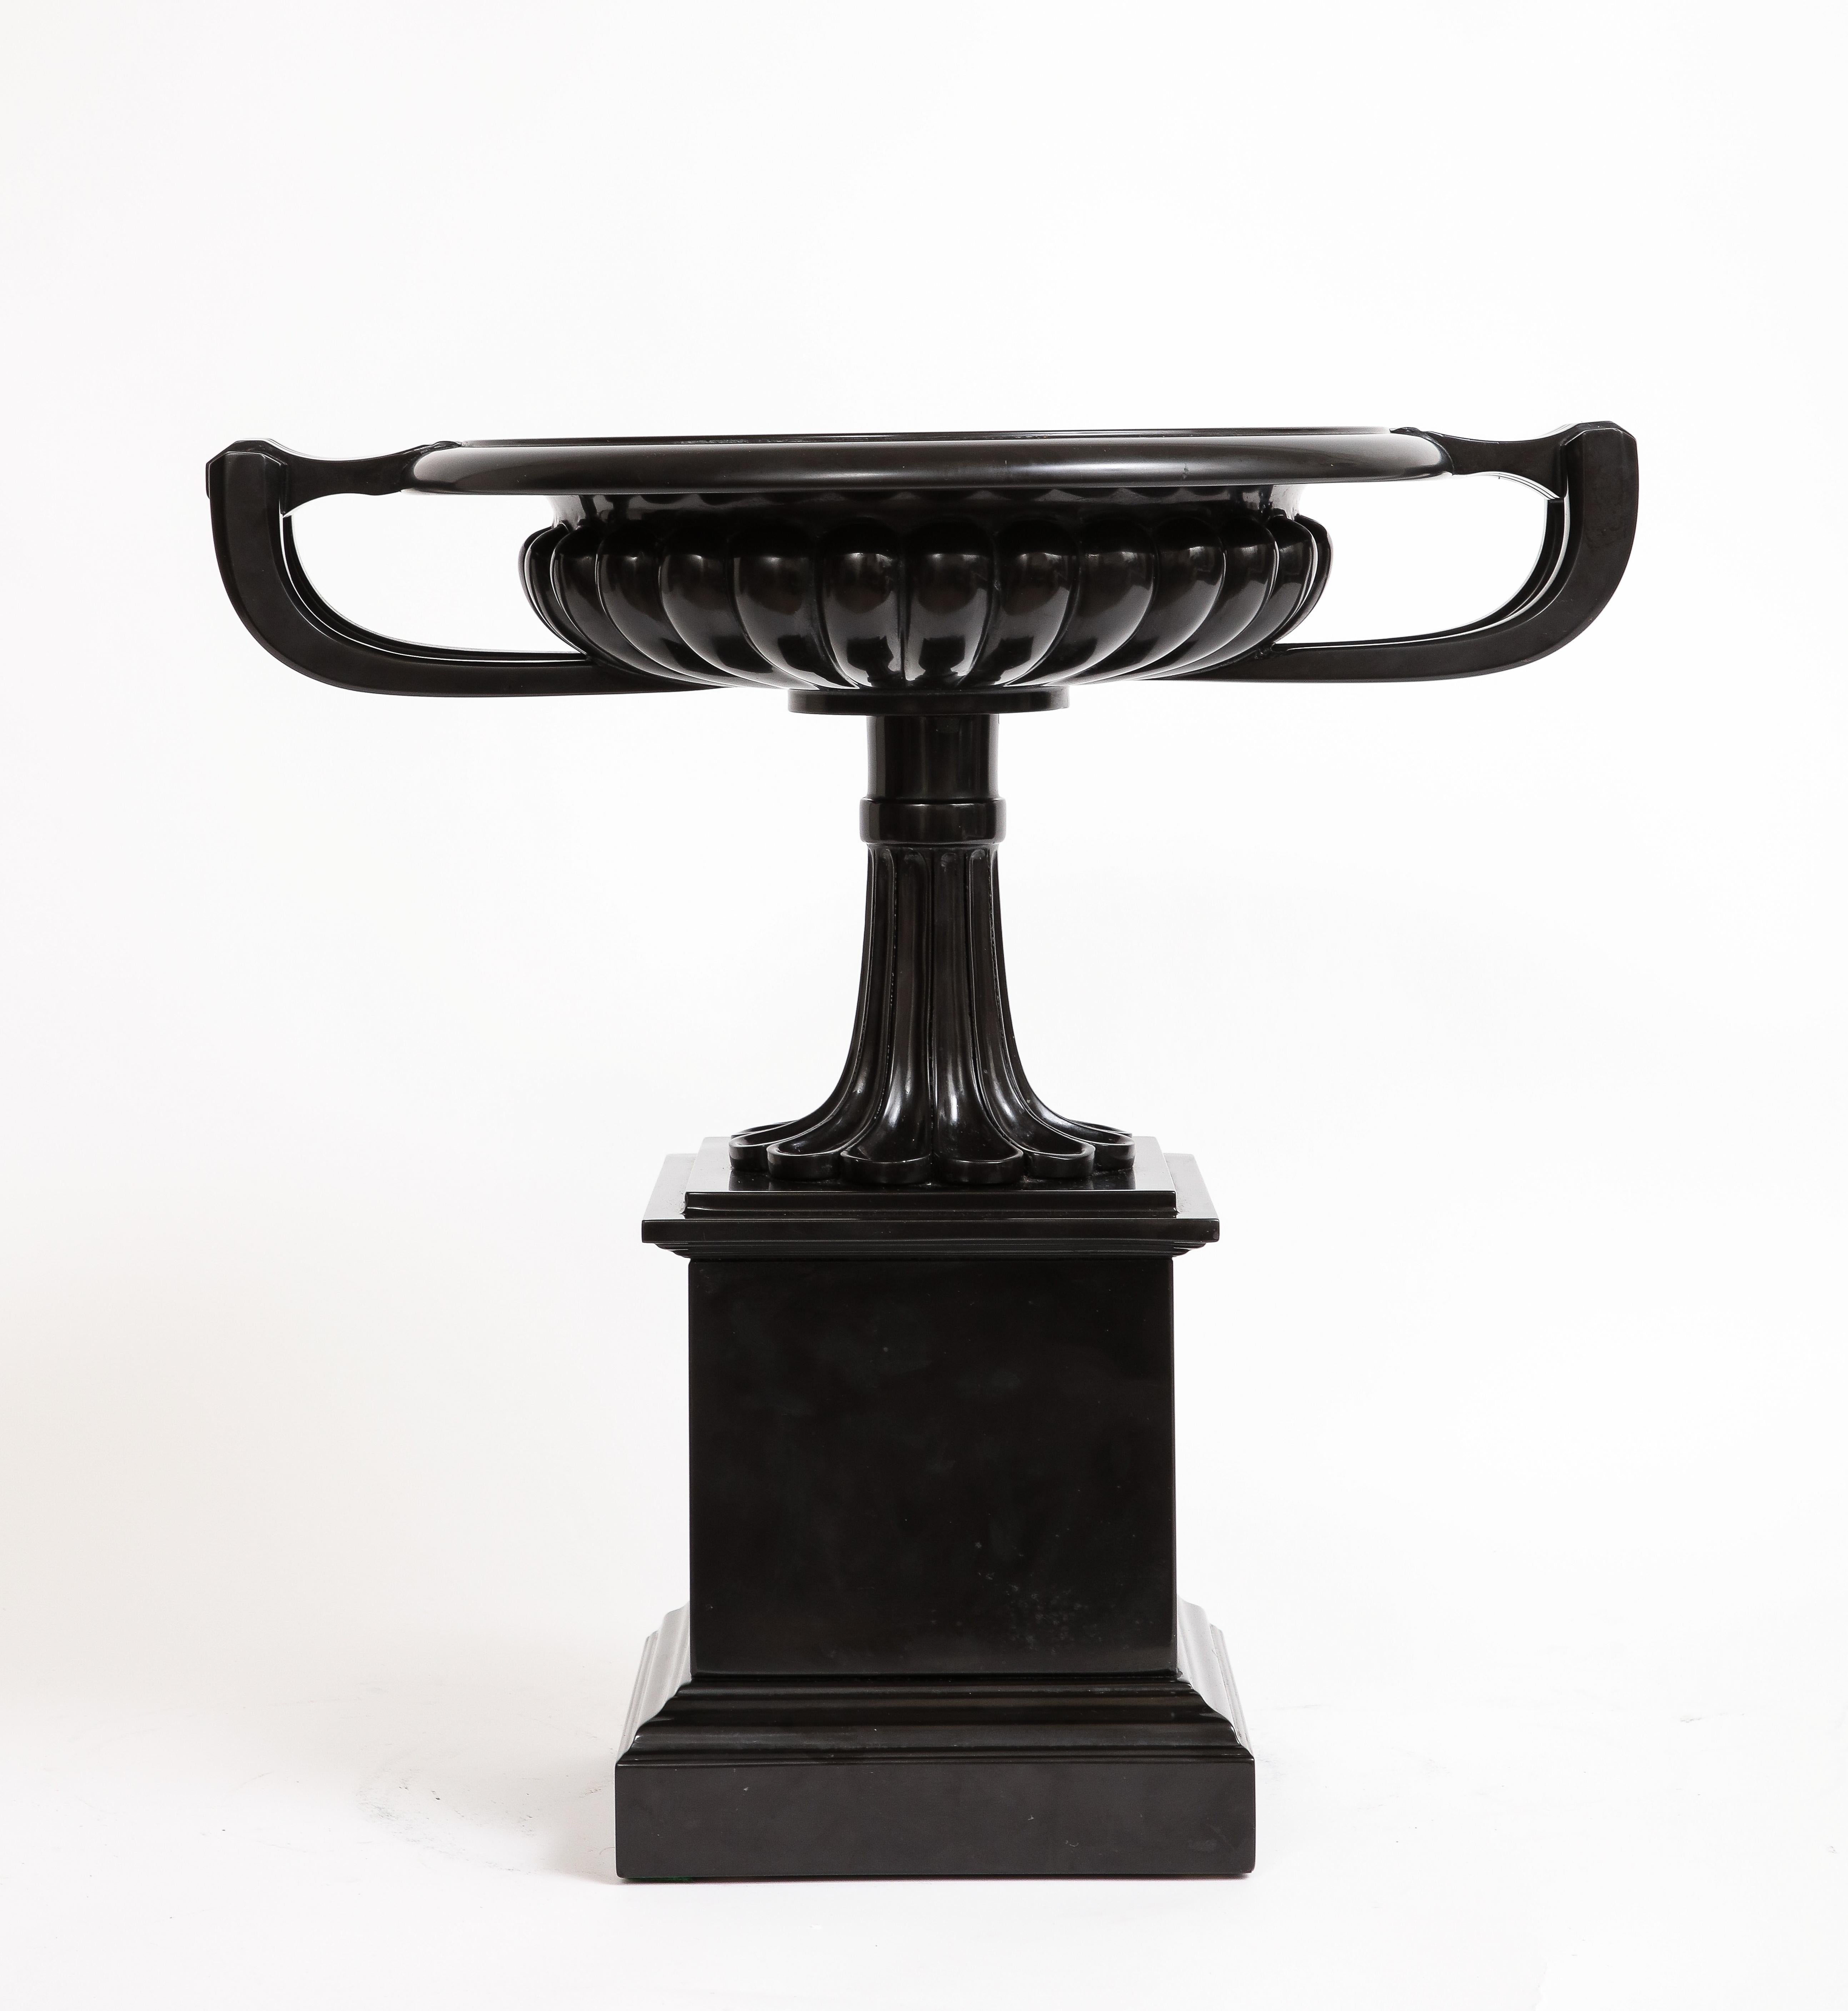 A Beautiful and Quite Large 19th century English Grand Tour Period Black Belgian Marble Pedestal stand Two-Handled Centerpiece/Tazza. This hand carved and hand-polished marble tazza centerpiece is characterized by a wonderfully shallow circular bowl